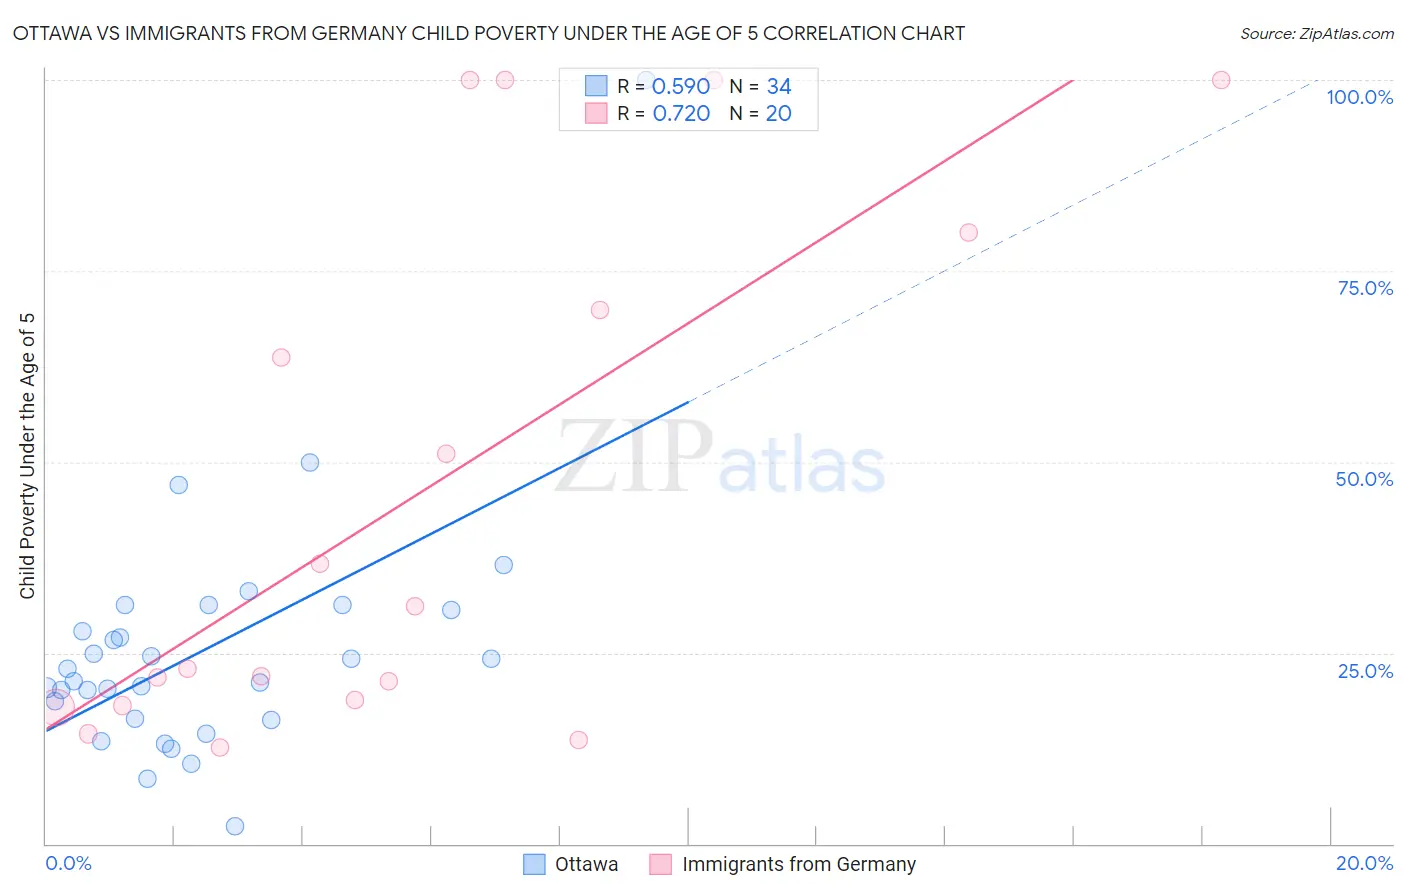 Ottawa vs Immigrants from Germany Child Poverty Under the Age of 5